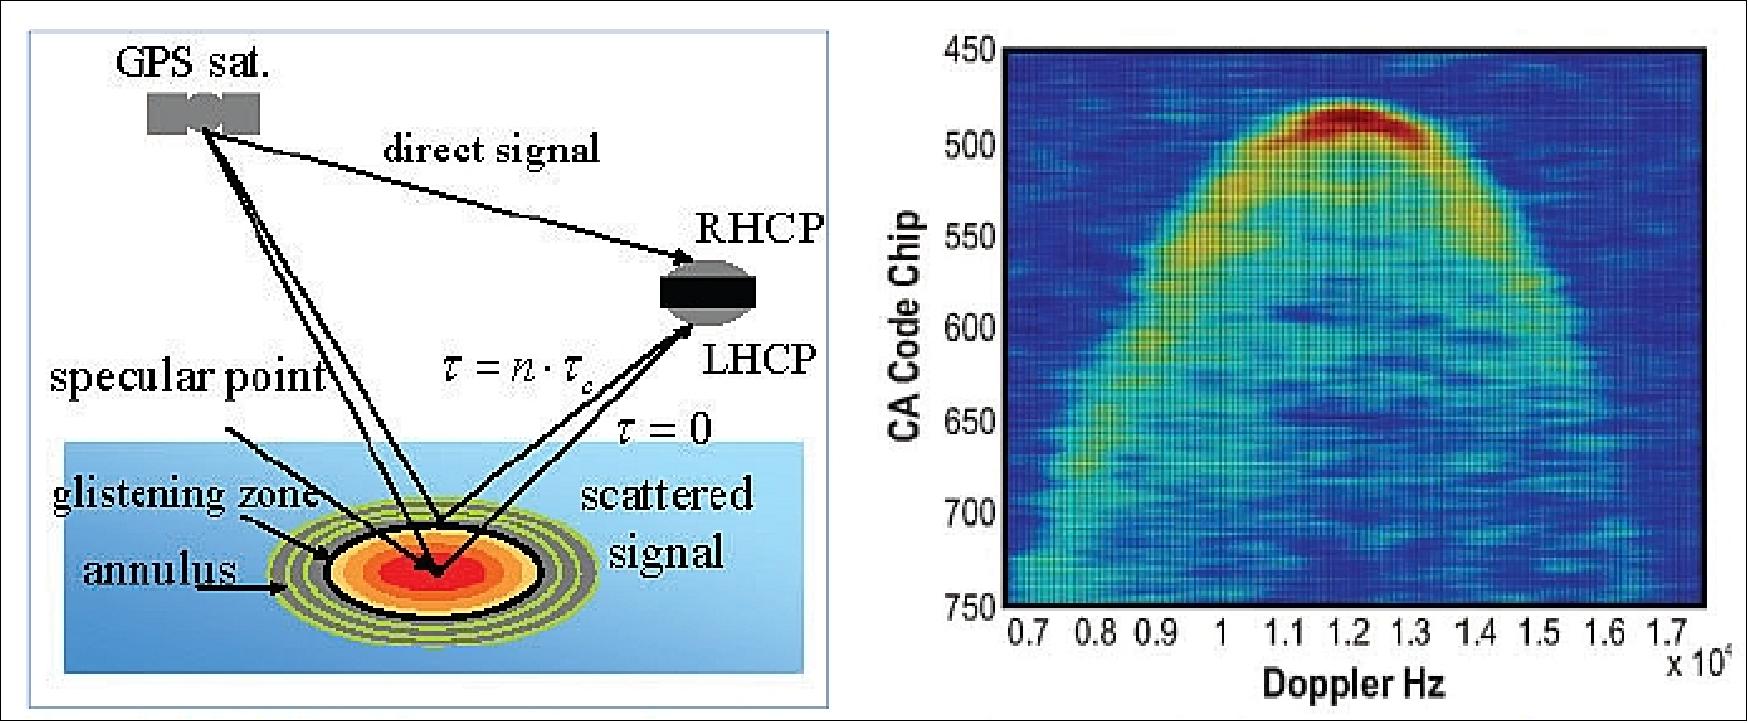 Figure 41: GPS signal propagation and scattering geometries for ocean surface bistatic quasi-specular scatterometry (left). Spatial distribution of the ocean surface scattering measured by the UK-DMC-1 demonstration spaceborne mission – referred to as the Delay Doppler Map (image credit: SSTL)